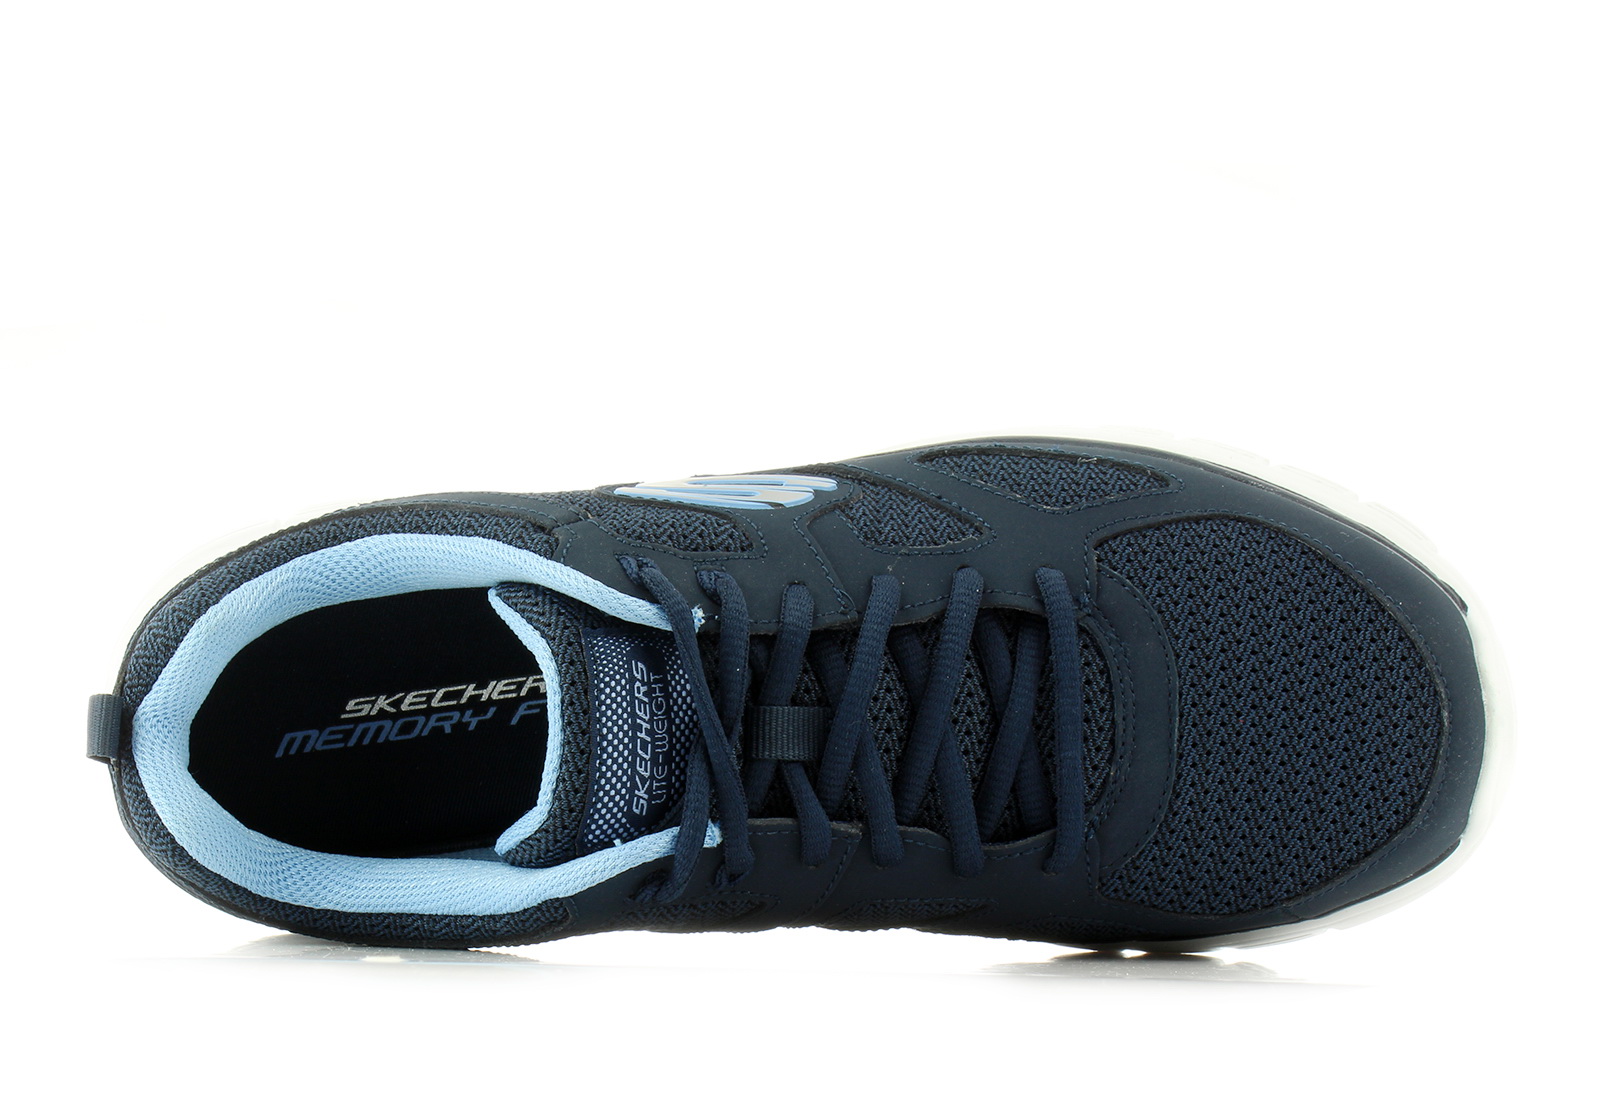 Skechers Sneakers - Burns- Agoura - - Online shop for sneakers, shoes and boots